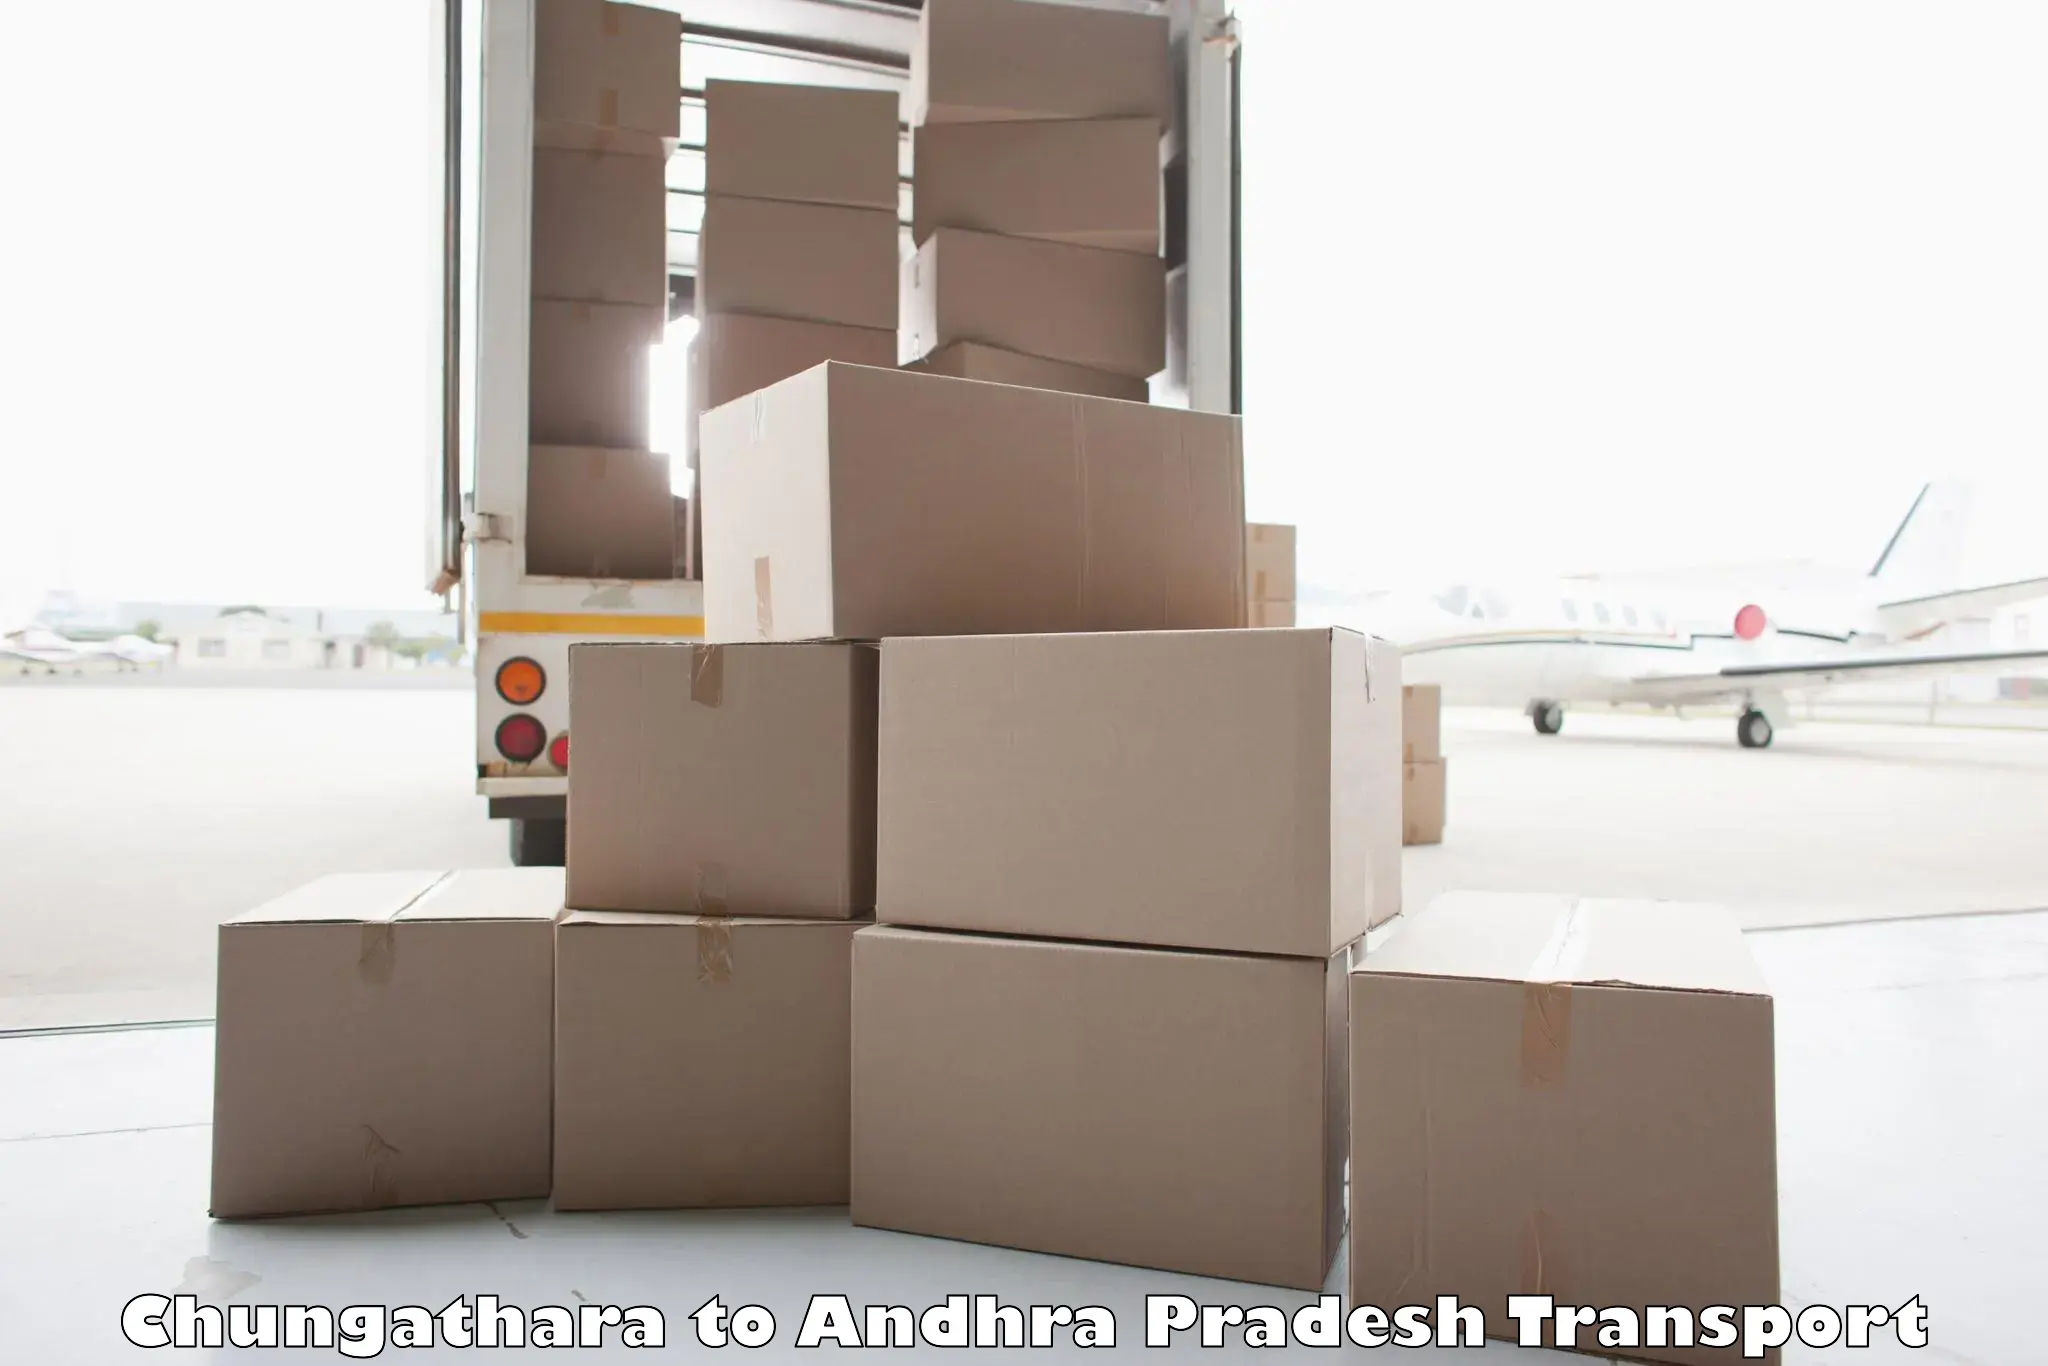 Container transportation services Chungathara to Razole